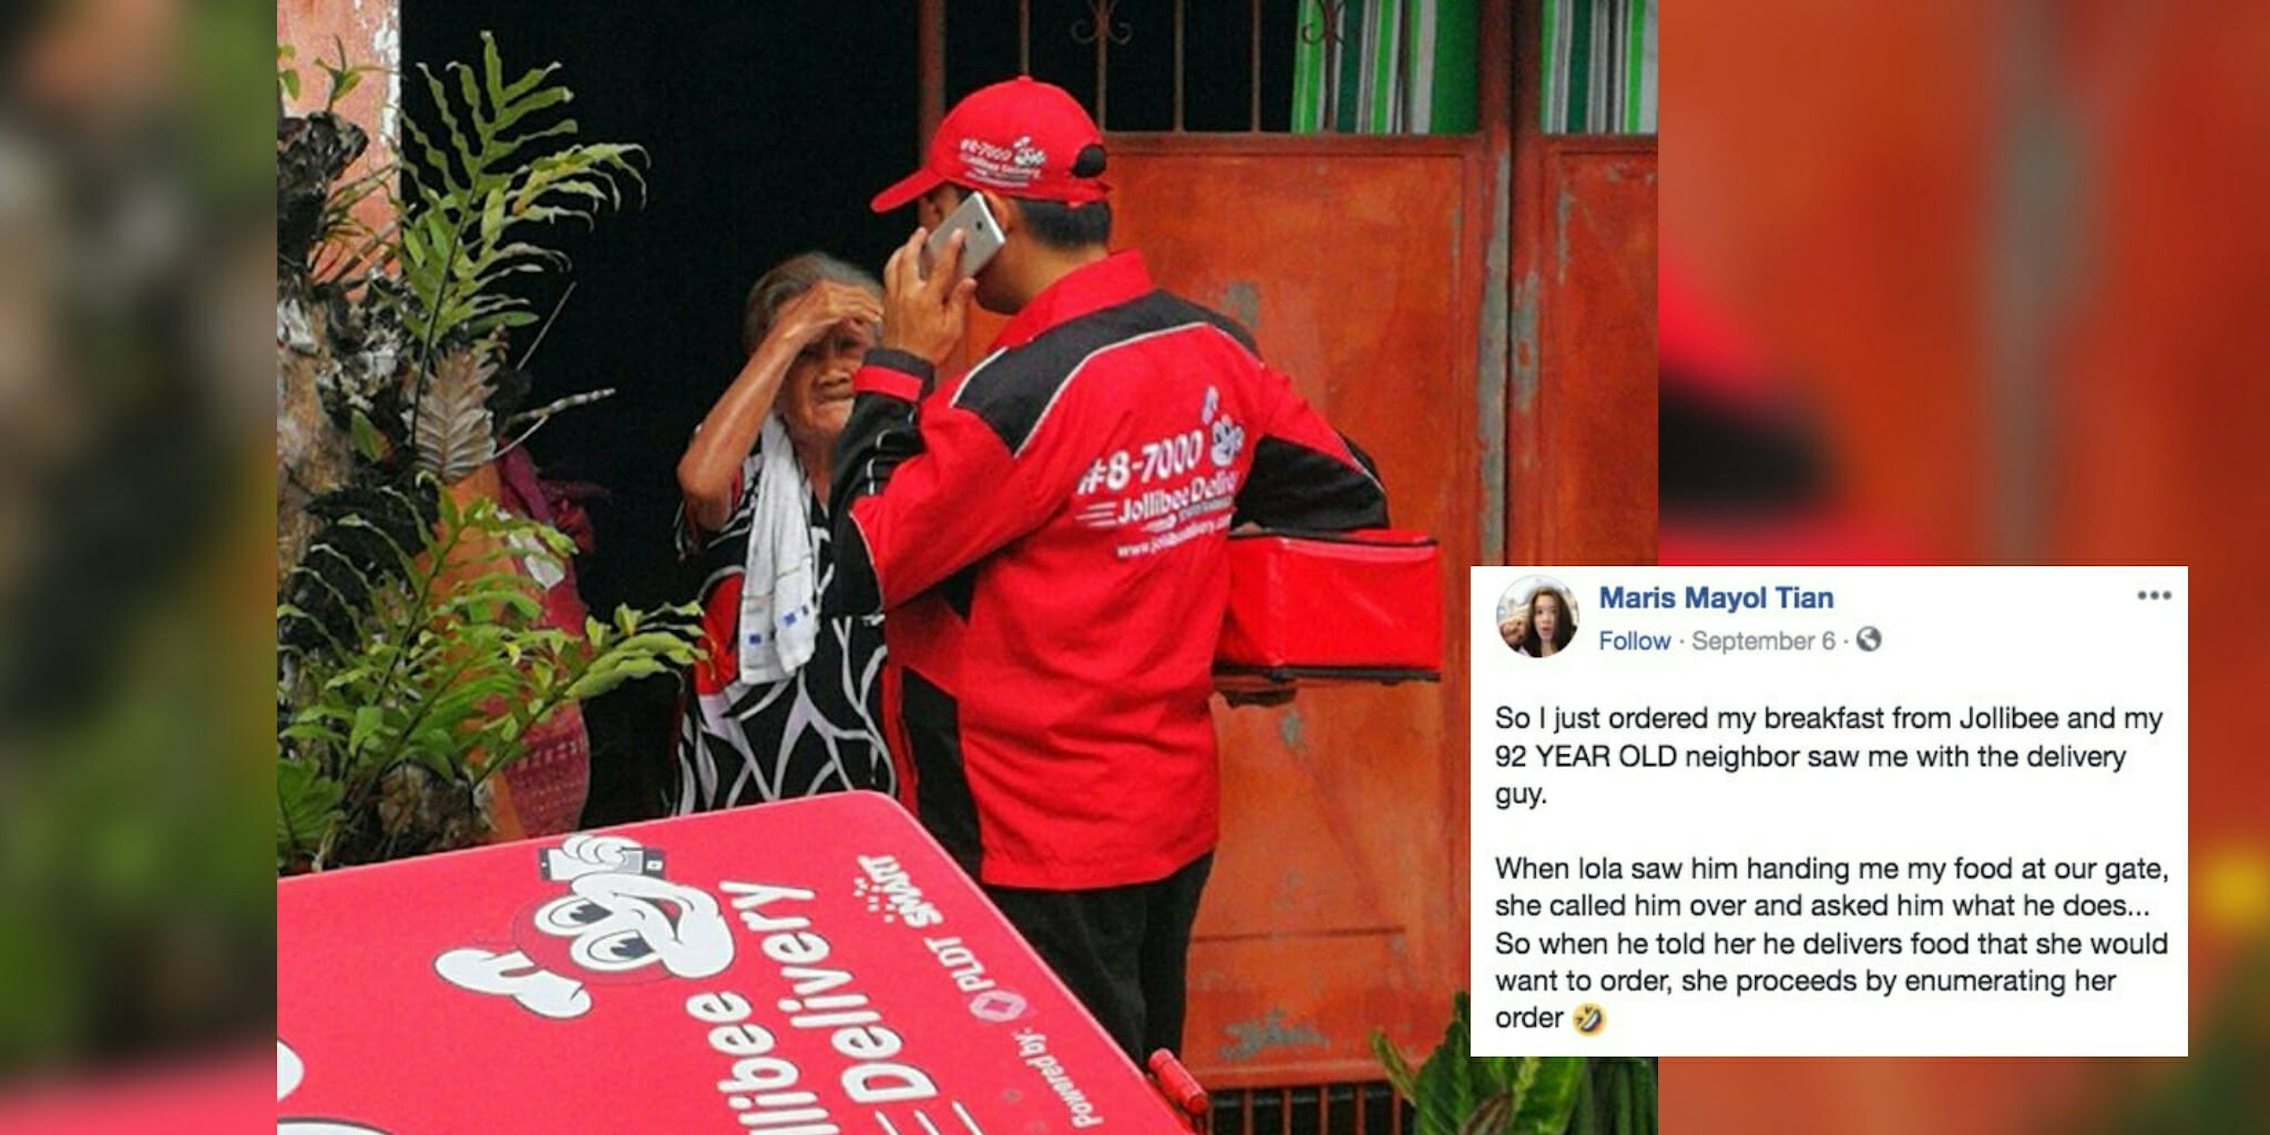 A Filipino woman saw her elderly neighbor order directly from the Jollibee delivery man.